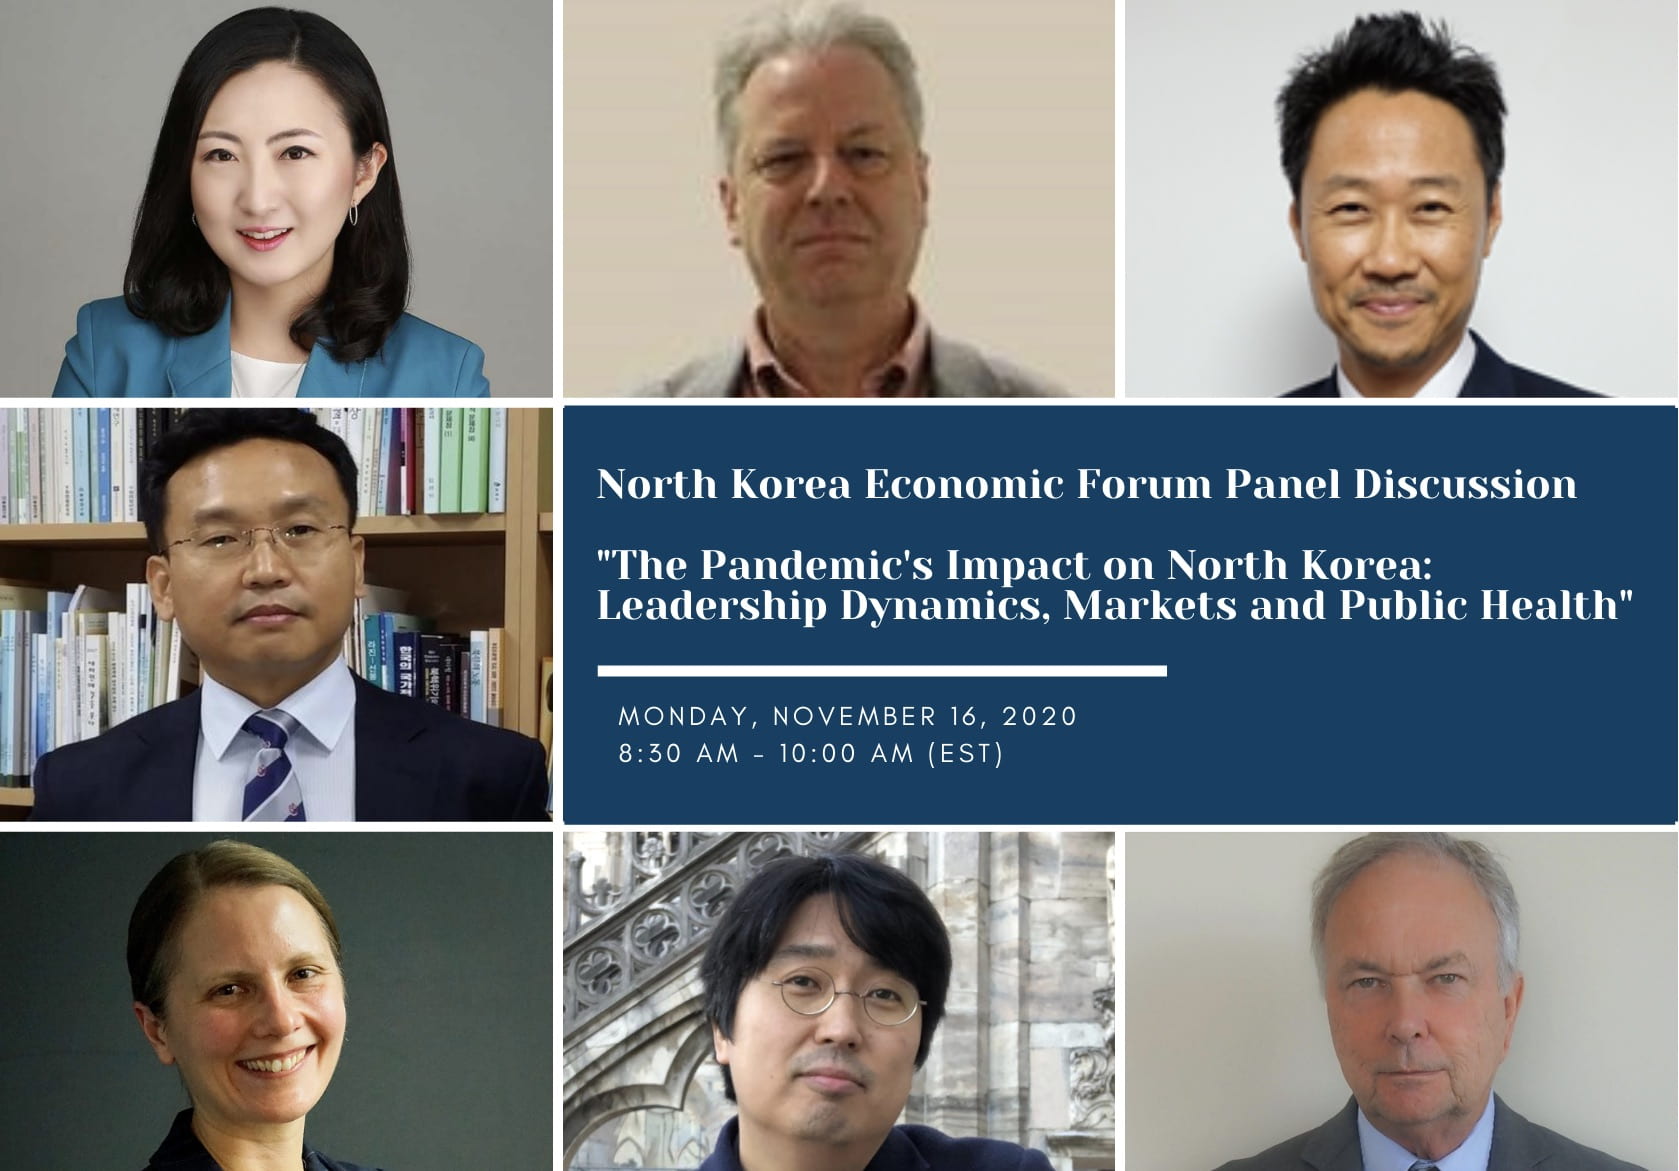 flyer with collage of panelists for event; text: North Korea Economic Forum Panel Discussion The Pandemic's Impact on North Korea